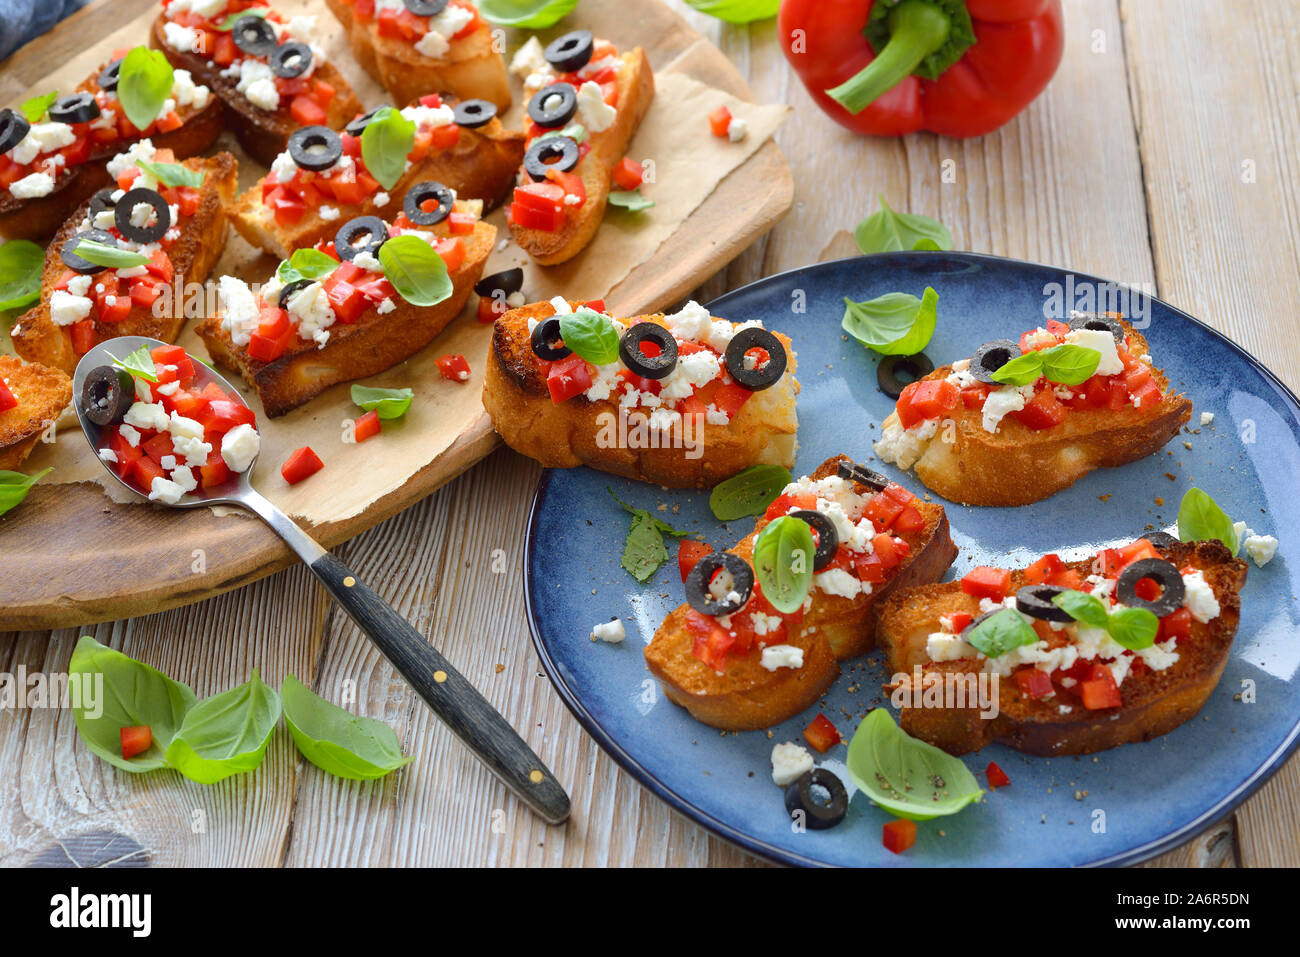 Warm Greek bruschetta: Crispy baked small slices of pita bread with feta cheese, black olives, red peppers and basil, served as an appetizer Stock Photo